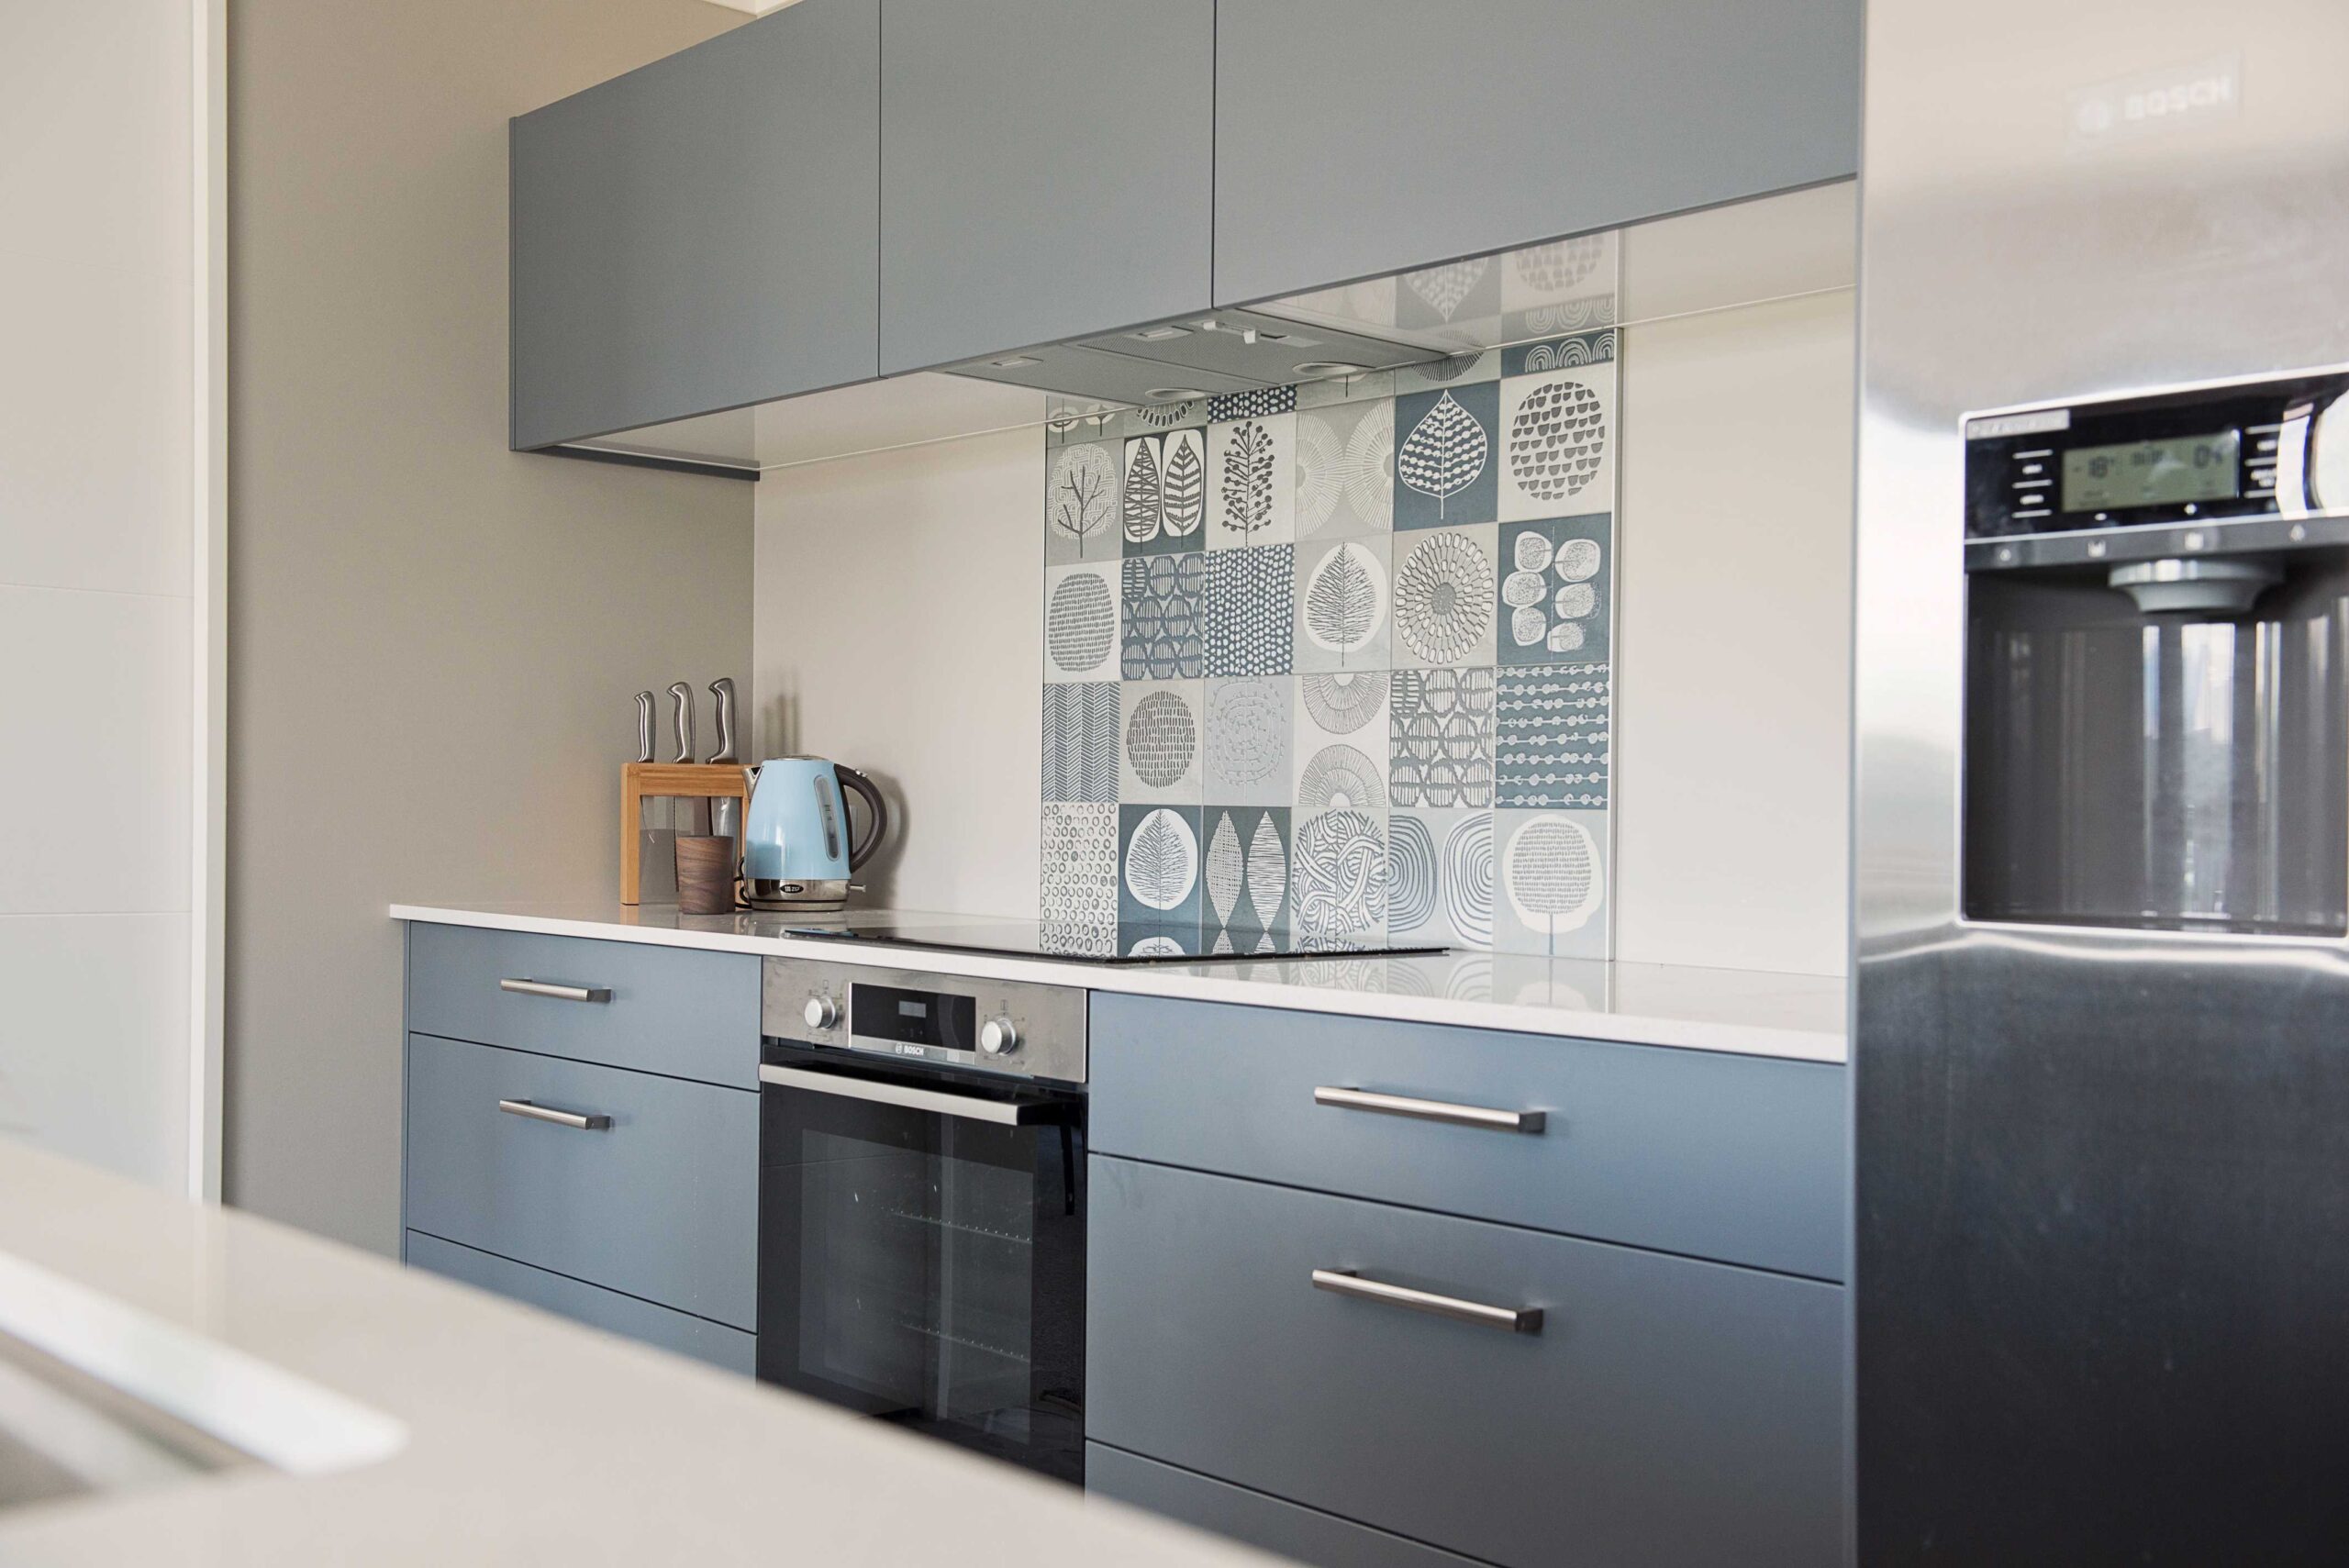  Beautiful Mid-Century tiles provide a touch of interest in this kitchen.